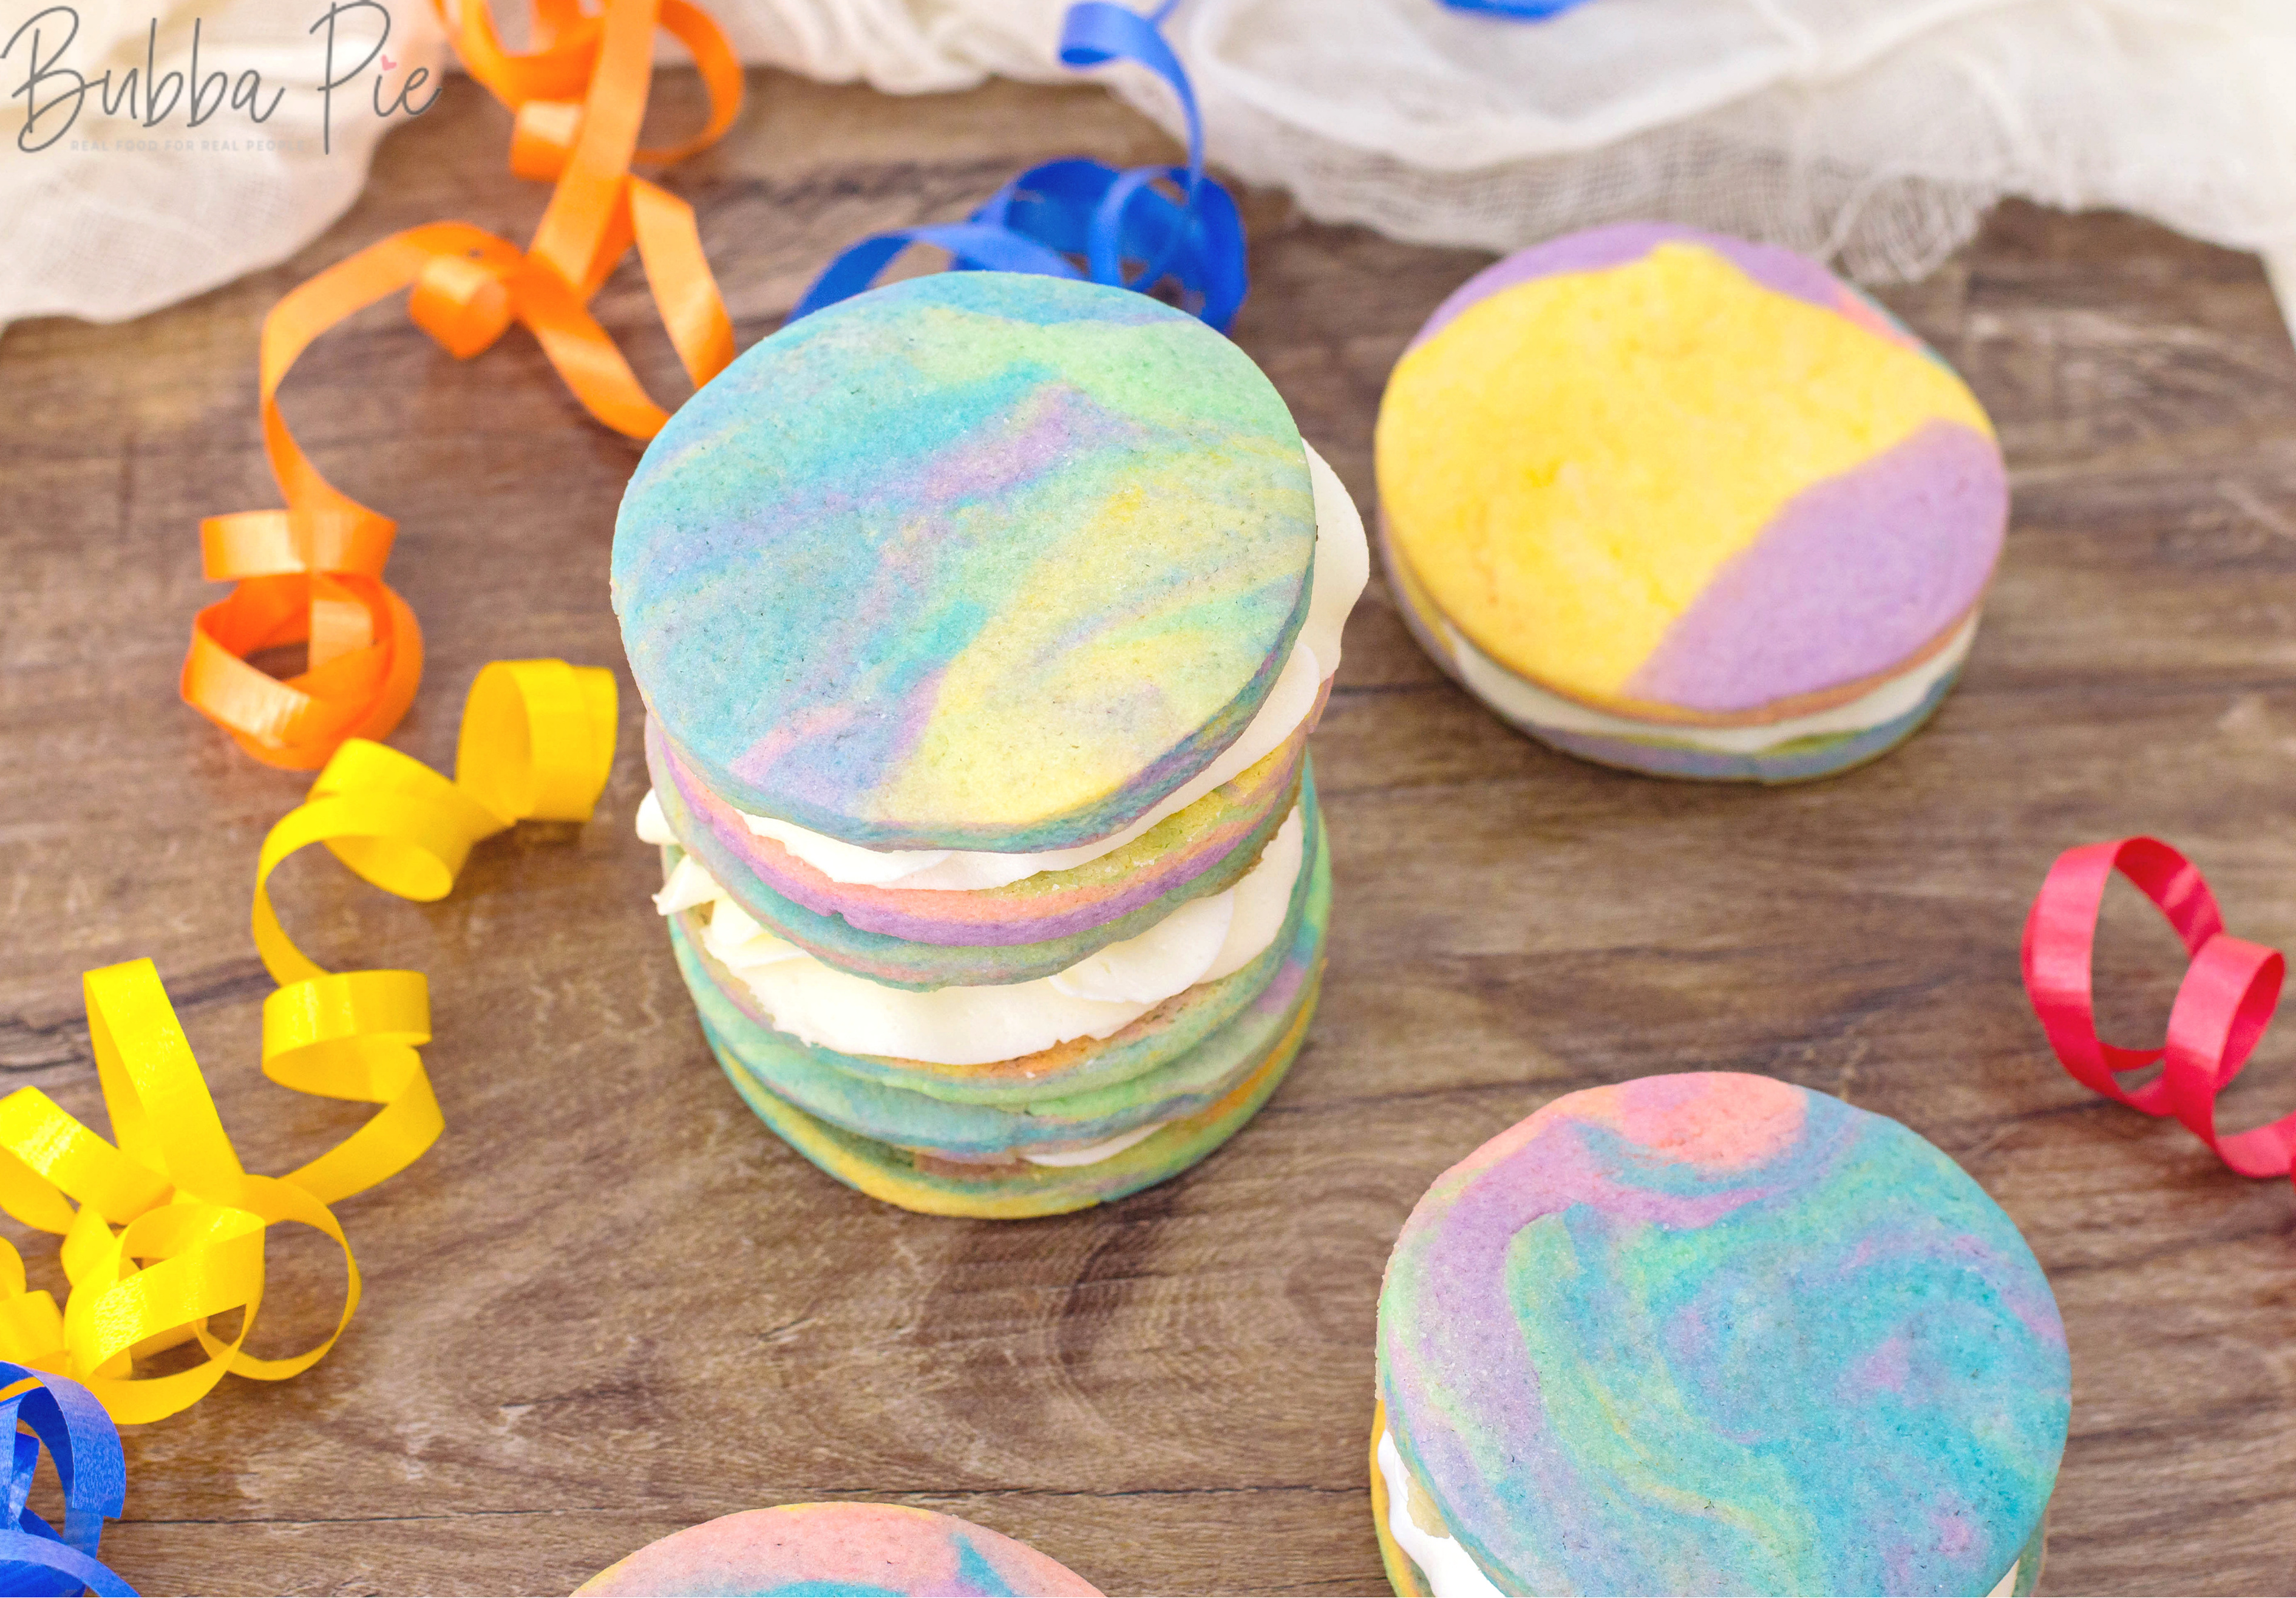 Rainbow Sugar Cookies Sandwich is a fun dessert recipe to make with your kids